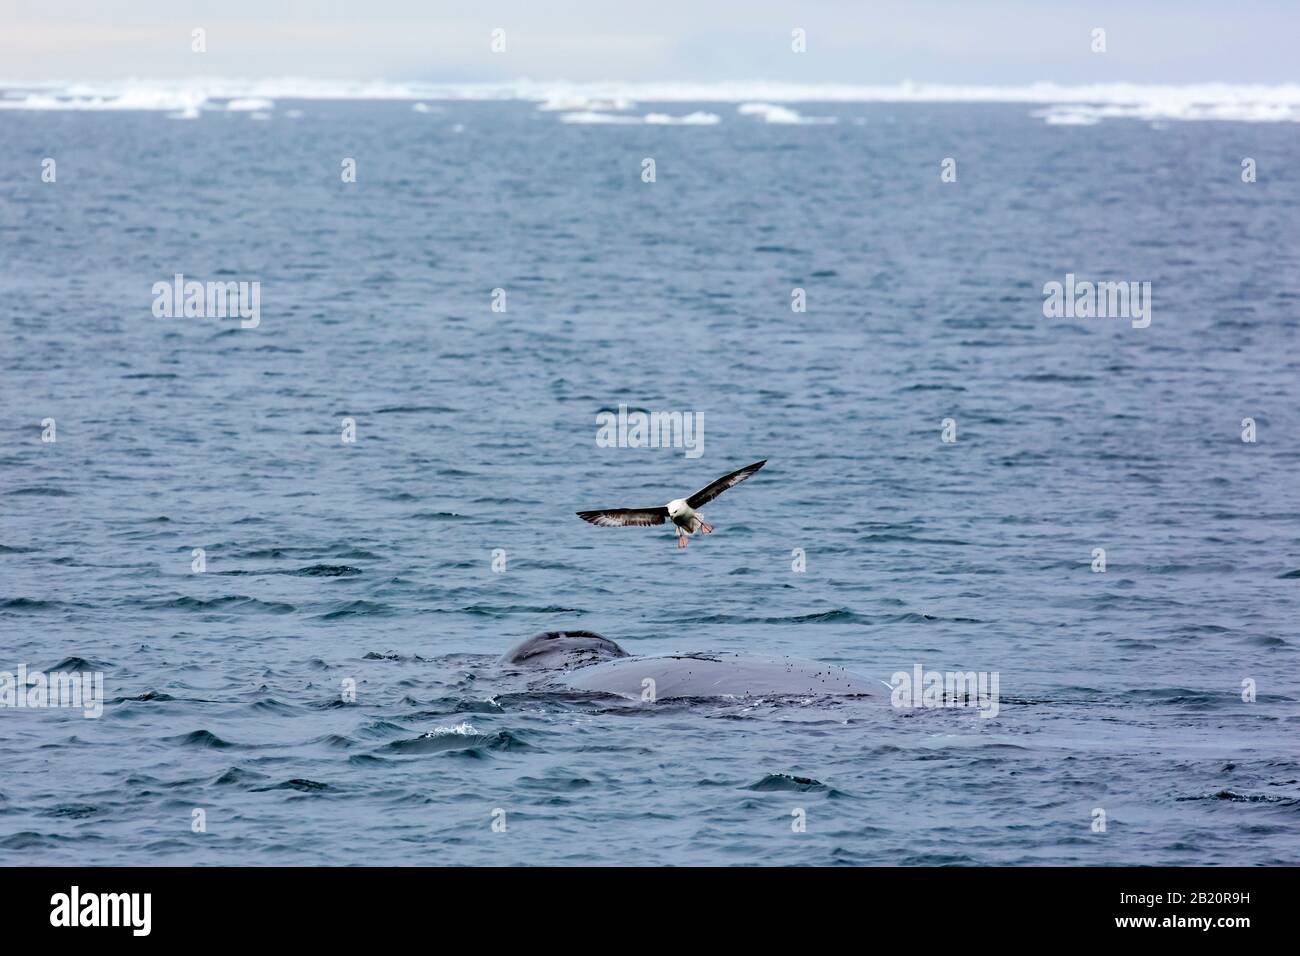 Northern fulmar (Fulmarus glacialis) hovering above bowhead whale (Balaena mysticetus) surfacing the Arctic Ocean, Svalbard / Spitsbergen, Norway Stock Photo